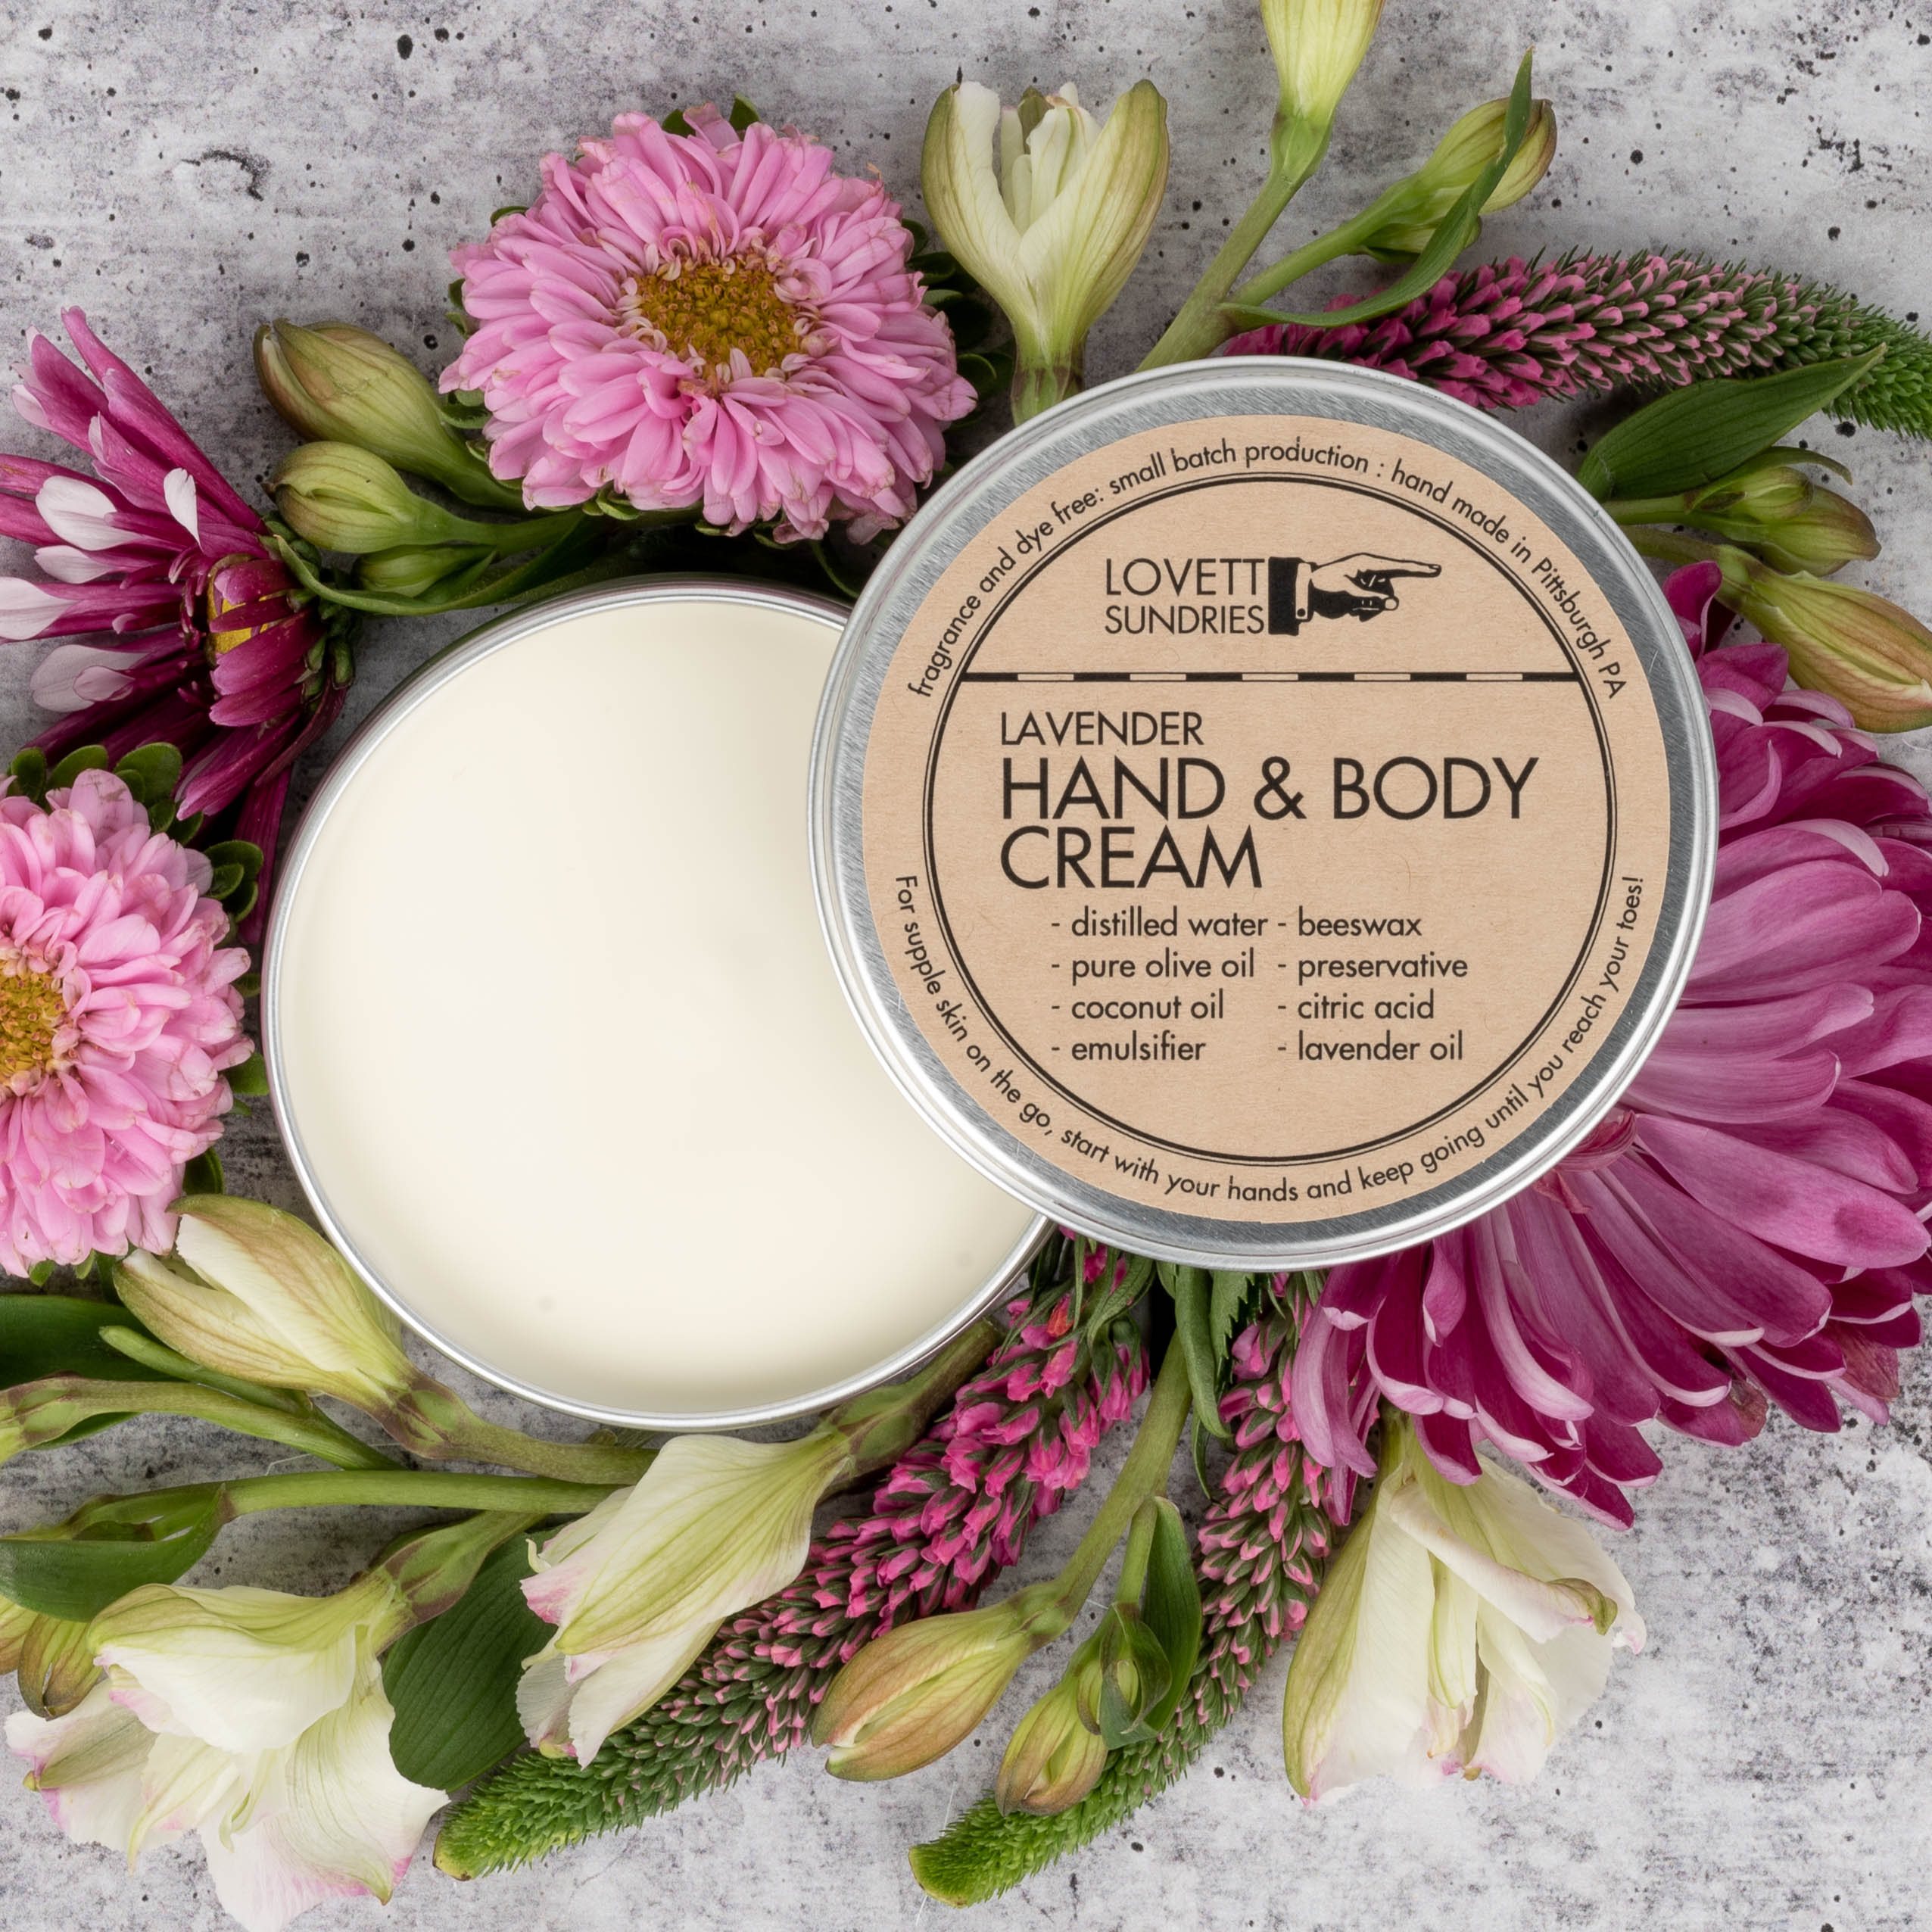 Open Lavender Hand & Body Cream surrounded by fresh spring flowers.